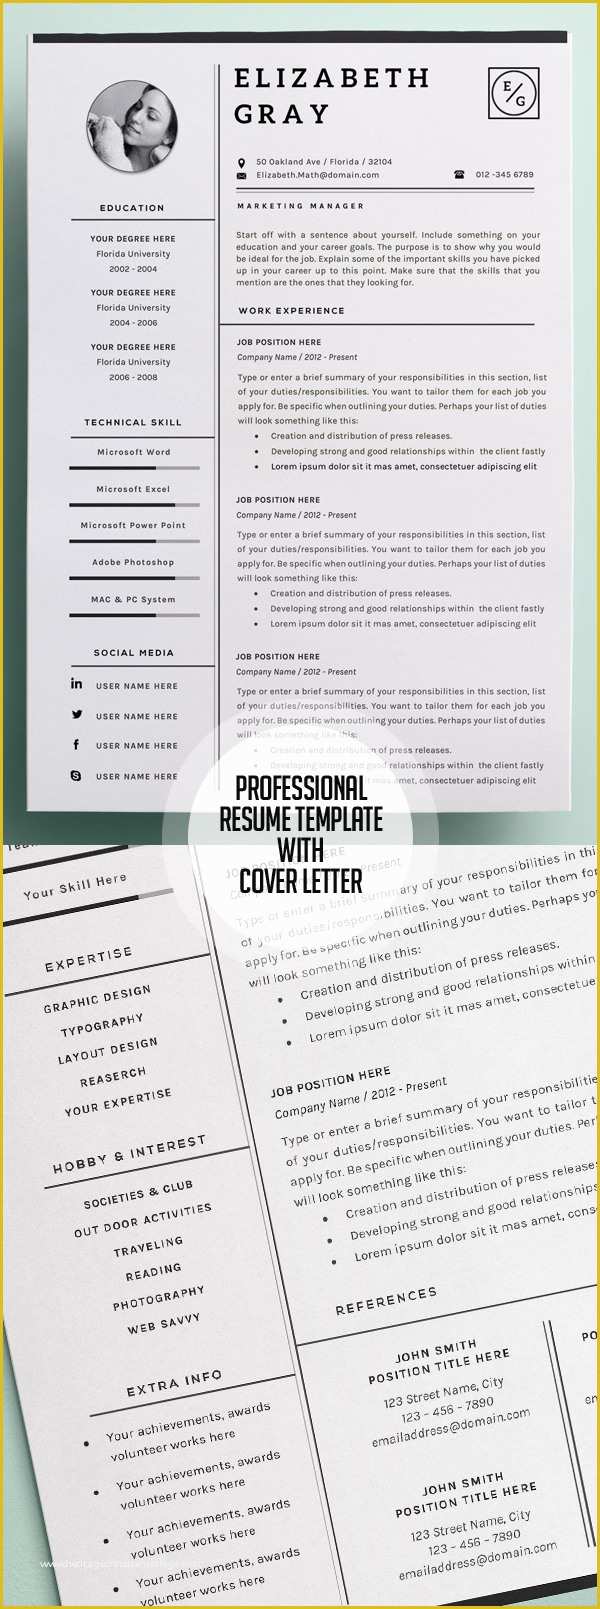 Free Business Resume Template 2018 Of 50 Best Resume Templates for 2018 Design